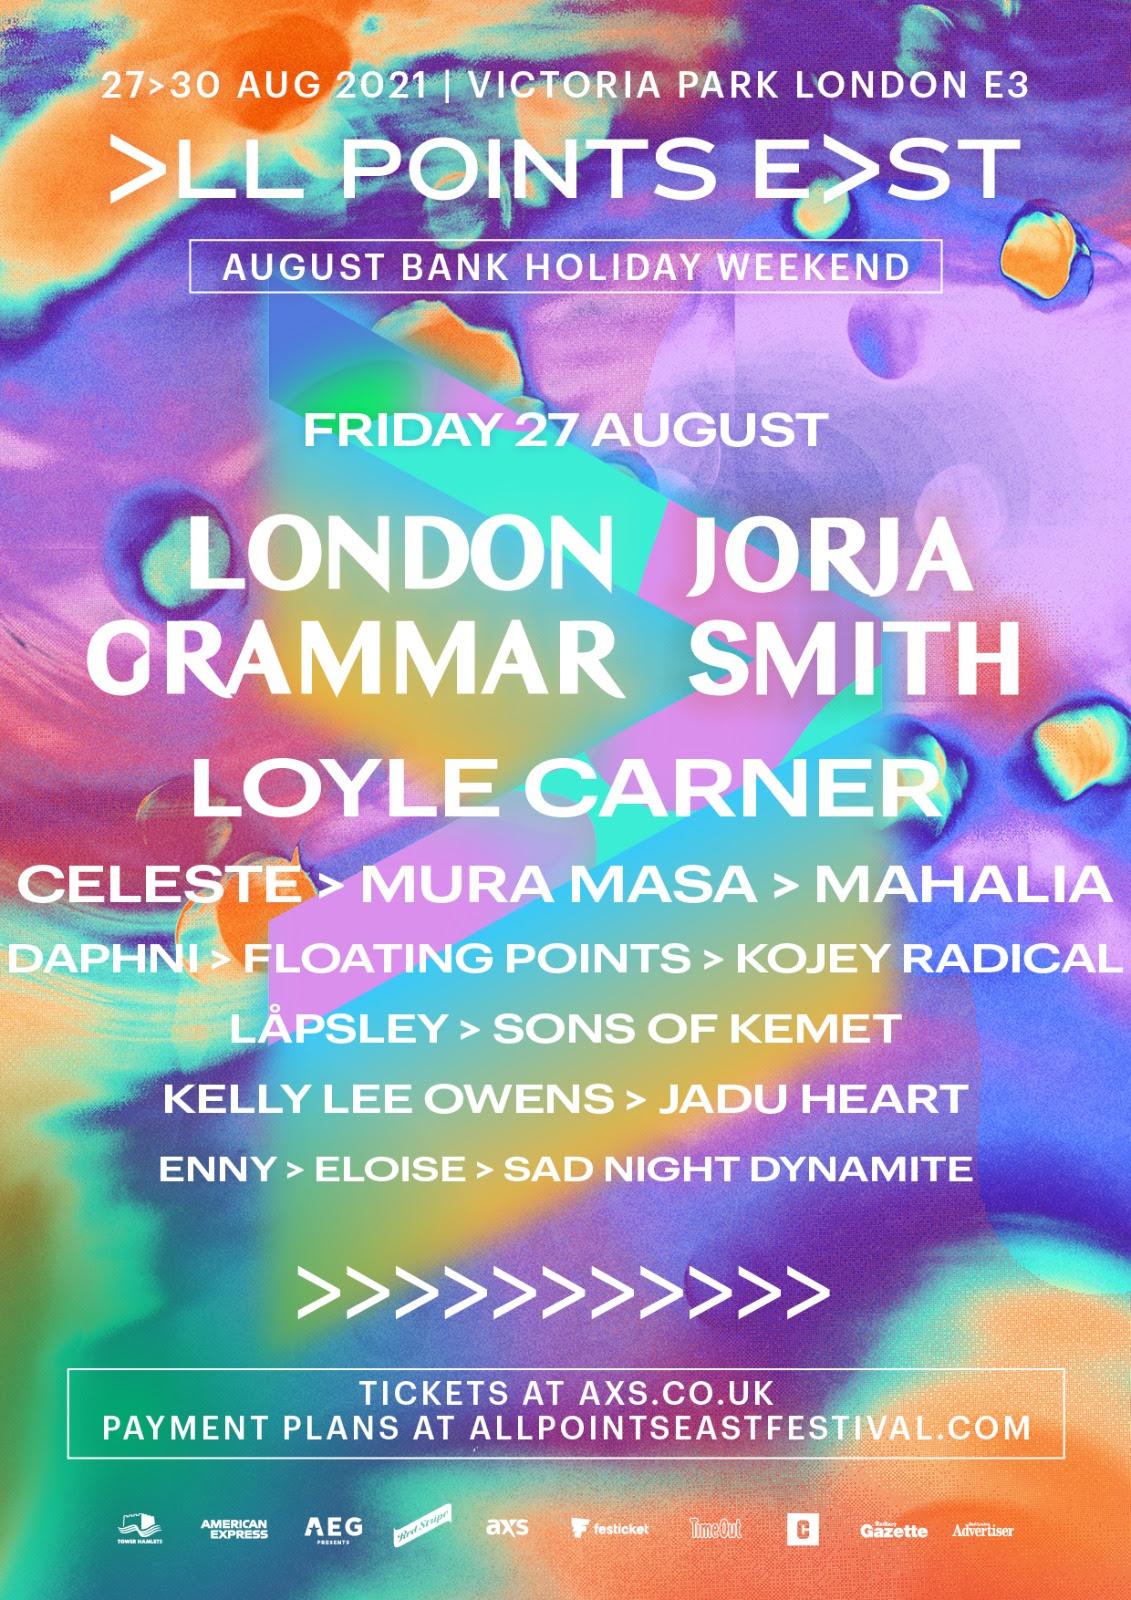 All Points East announces London Grammar + Jorja Smith for Friday August 27th